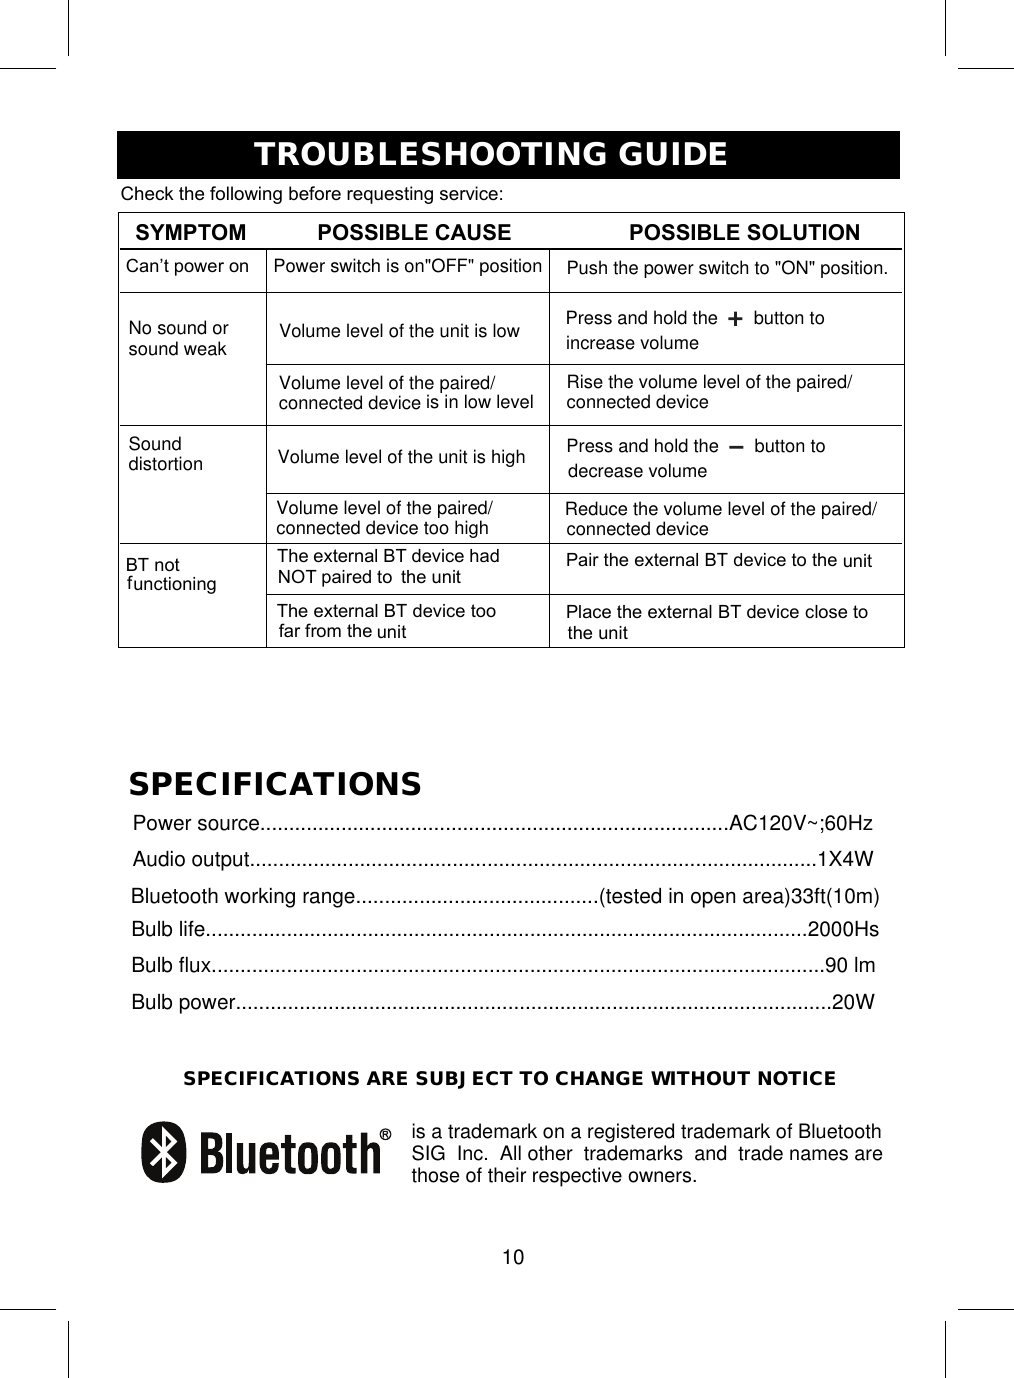 is a trademark on a registered trademark of BluetoothSIG  Inc.  All other  trademarks  and  trade names are those of their respective owners.SPECIFICATIONSSPECIFICATIONS ARE SUBJECT TO CHANGE WITHOUT NOTICEBluetooth working range..........................................(tested in open area)33ft(10m)Bulb life........................................................................................................2000HsBulb power.......................................................................................................20WAudio output..................................................................................................1X4W10TROUBLESHOOTING GUIDECheck the following before requesting service:SYMPTOM POSSIBLE CAUSE POSSIBLE SOLUTIONCan’t power onBT notunctioningThe external BT device hadNOT paired to the unit Pair the external BT device to the unitThe external BT device toofar from the unitPlace the external BT device close tothe unitfNo sound orsound weakSound distortionVolume level of the unit is lowVolume level of the unit is highVolume level of the paired/ connected device is in low levelVolume level of the paired/connected device too highRise the volume level of the paired/connected deviceReduce the volume level of the paired/connected devicePress and hold the       button to decrease volumePress and hold the       button to increase volumePush the power switch to &quot;ON&quot; position. Power switch is on&quot;OFF&quot; position Power source.................................................................................AC120V~;60HzBulb flux..........................................................................................................90 lm